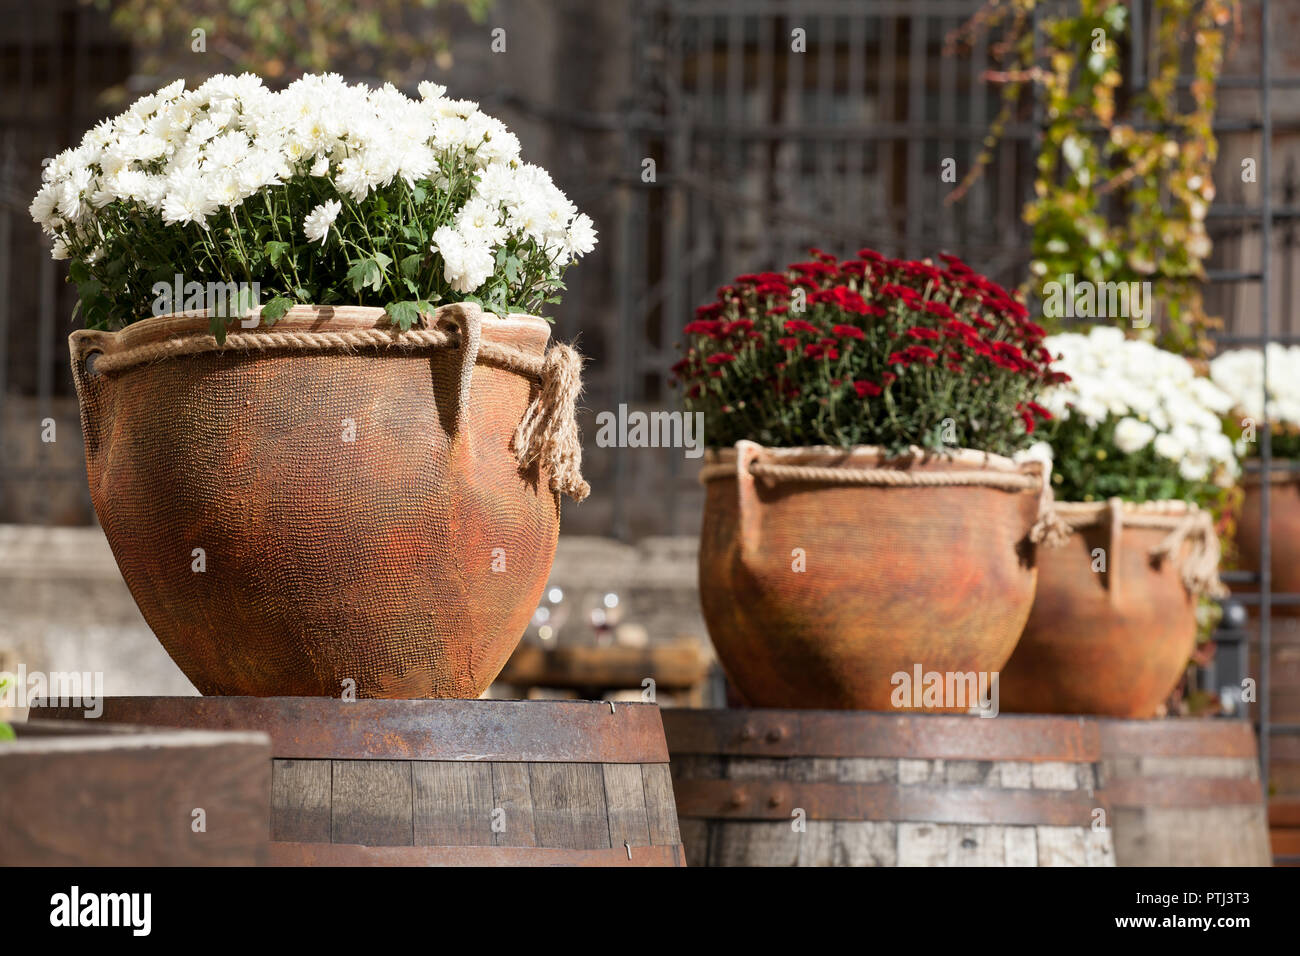 Large flower pots with white and burgundy chrysanthemums. Vases with flowers stand on wooden barrels. Sale of flowers Stock Photo